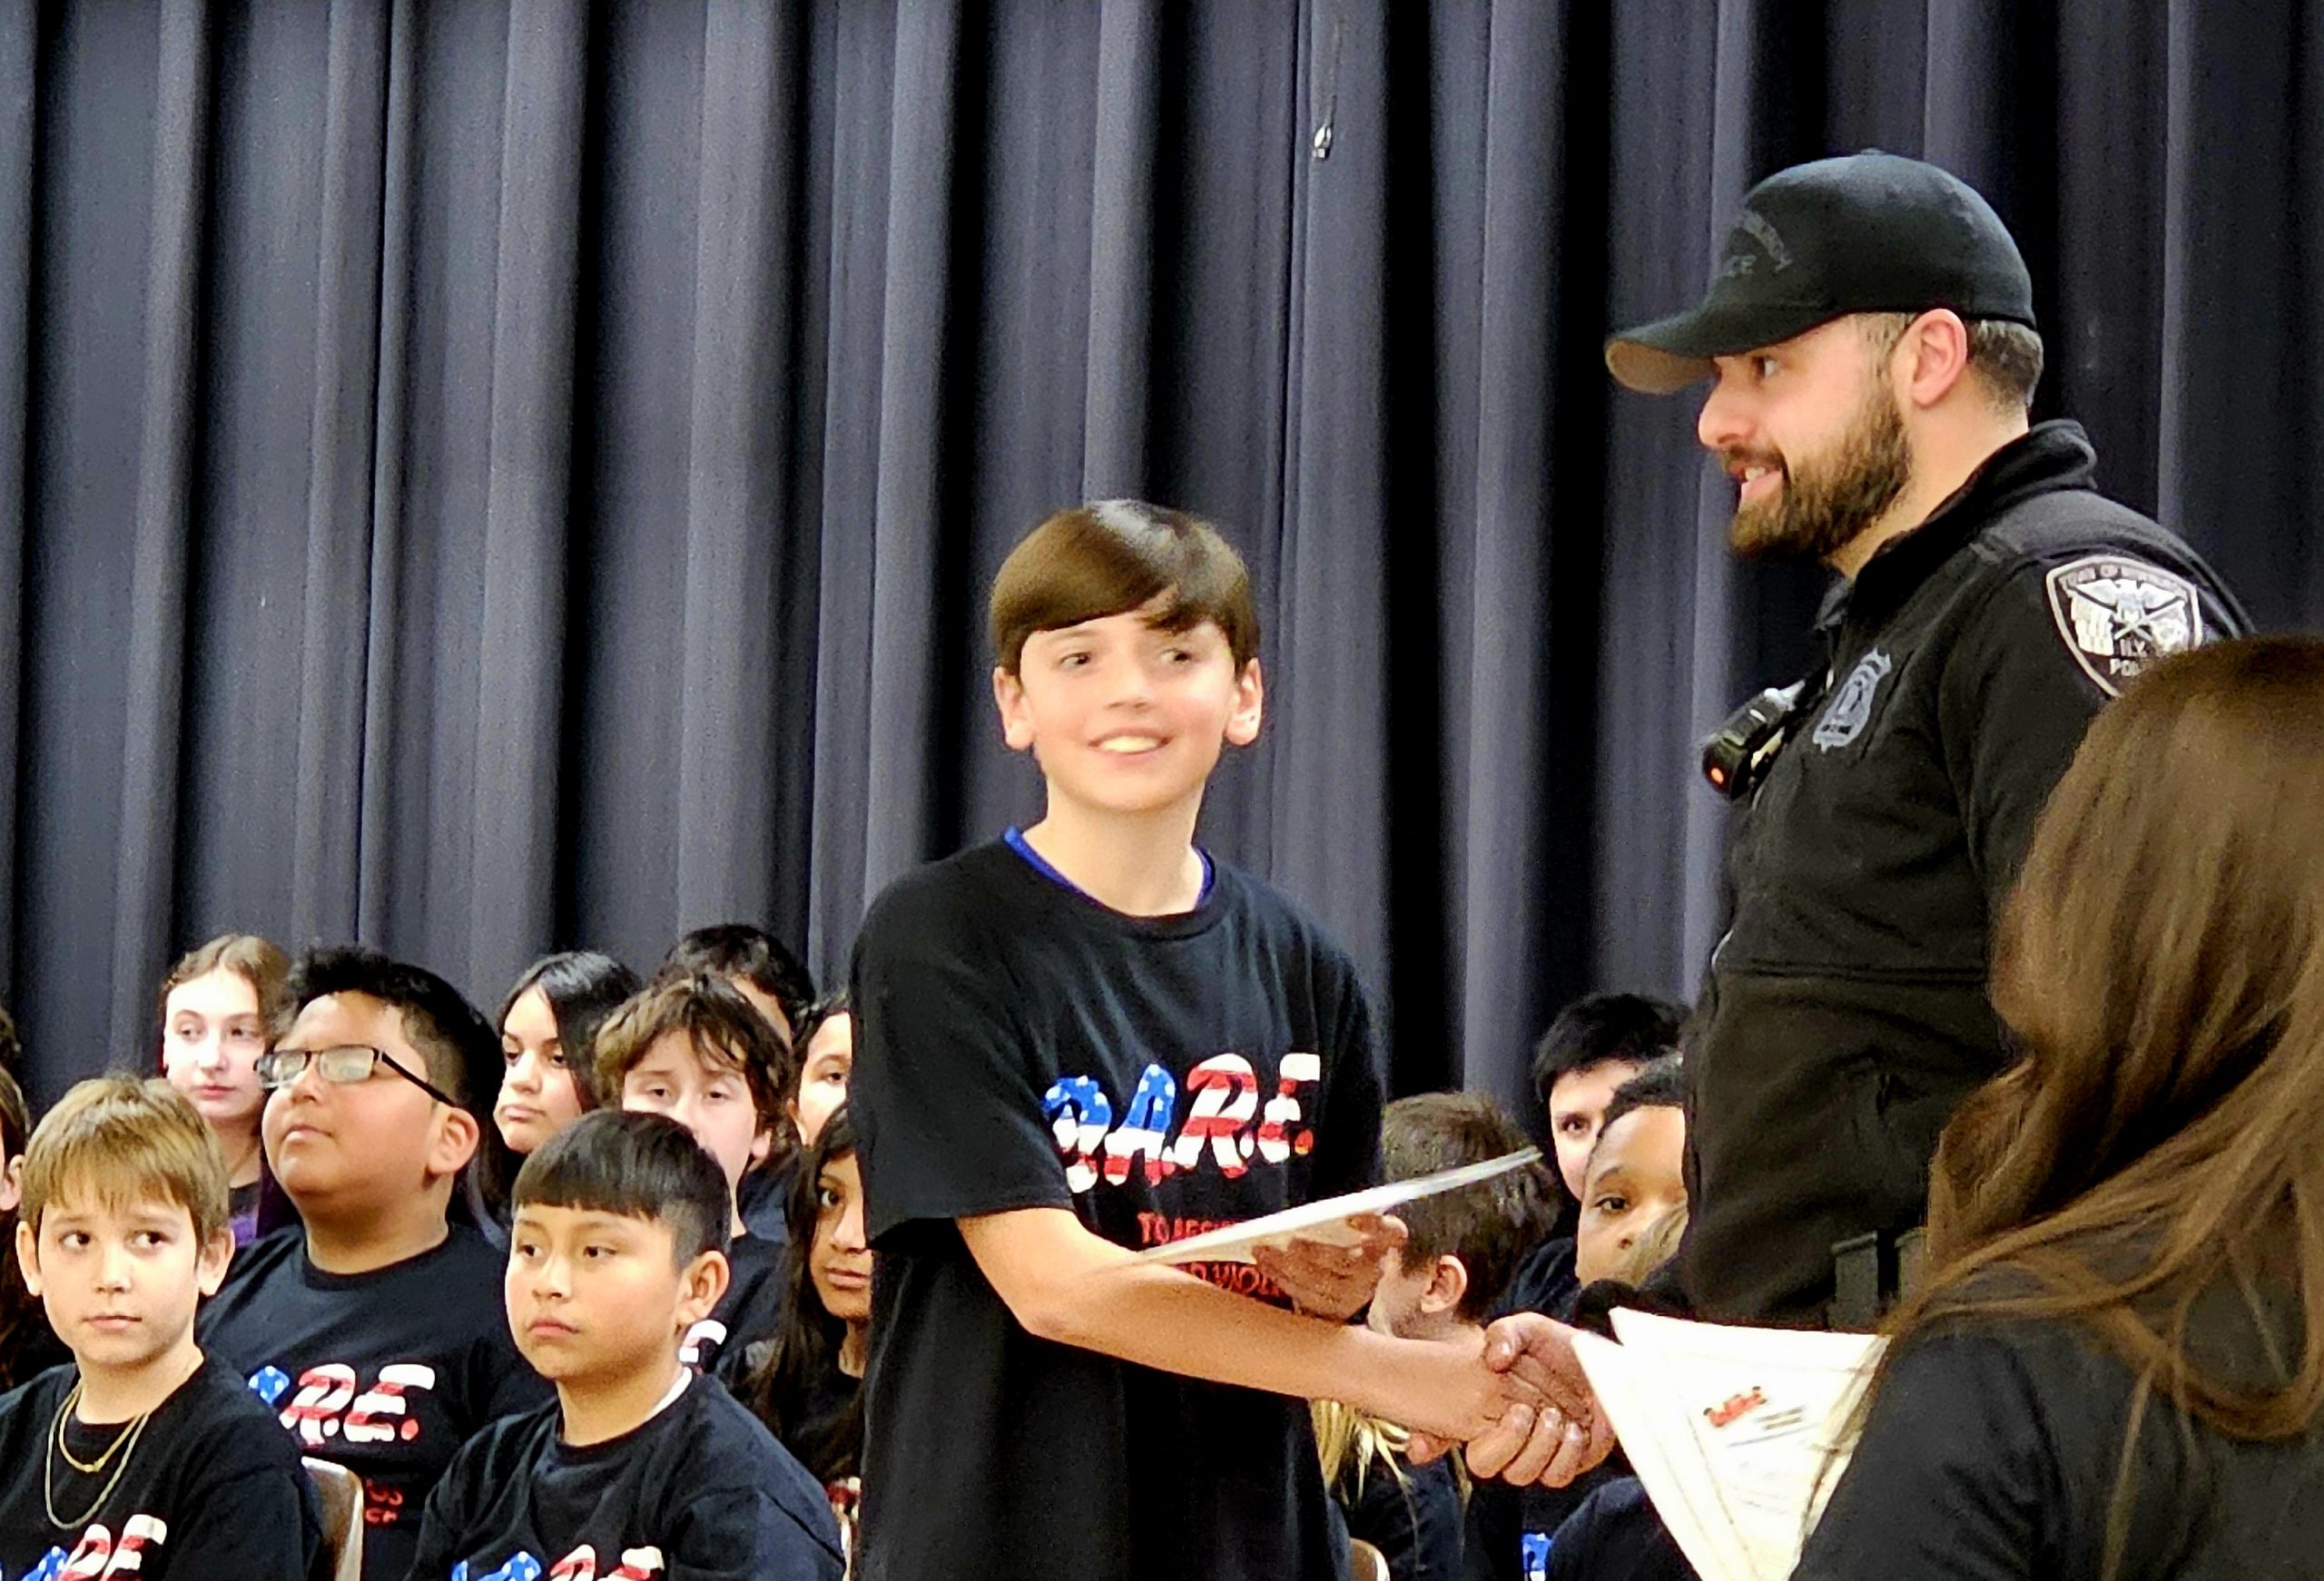 An EC Student receives his certificate from the DARE officer